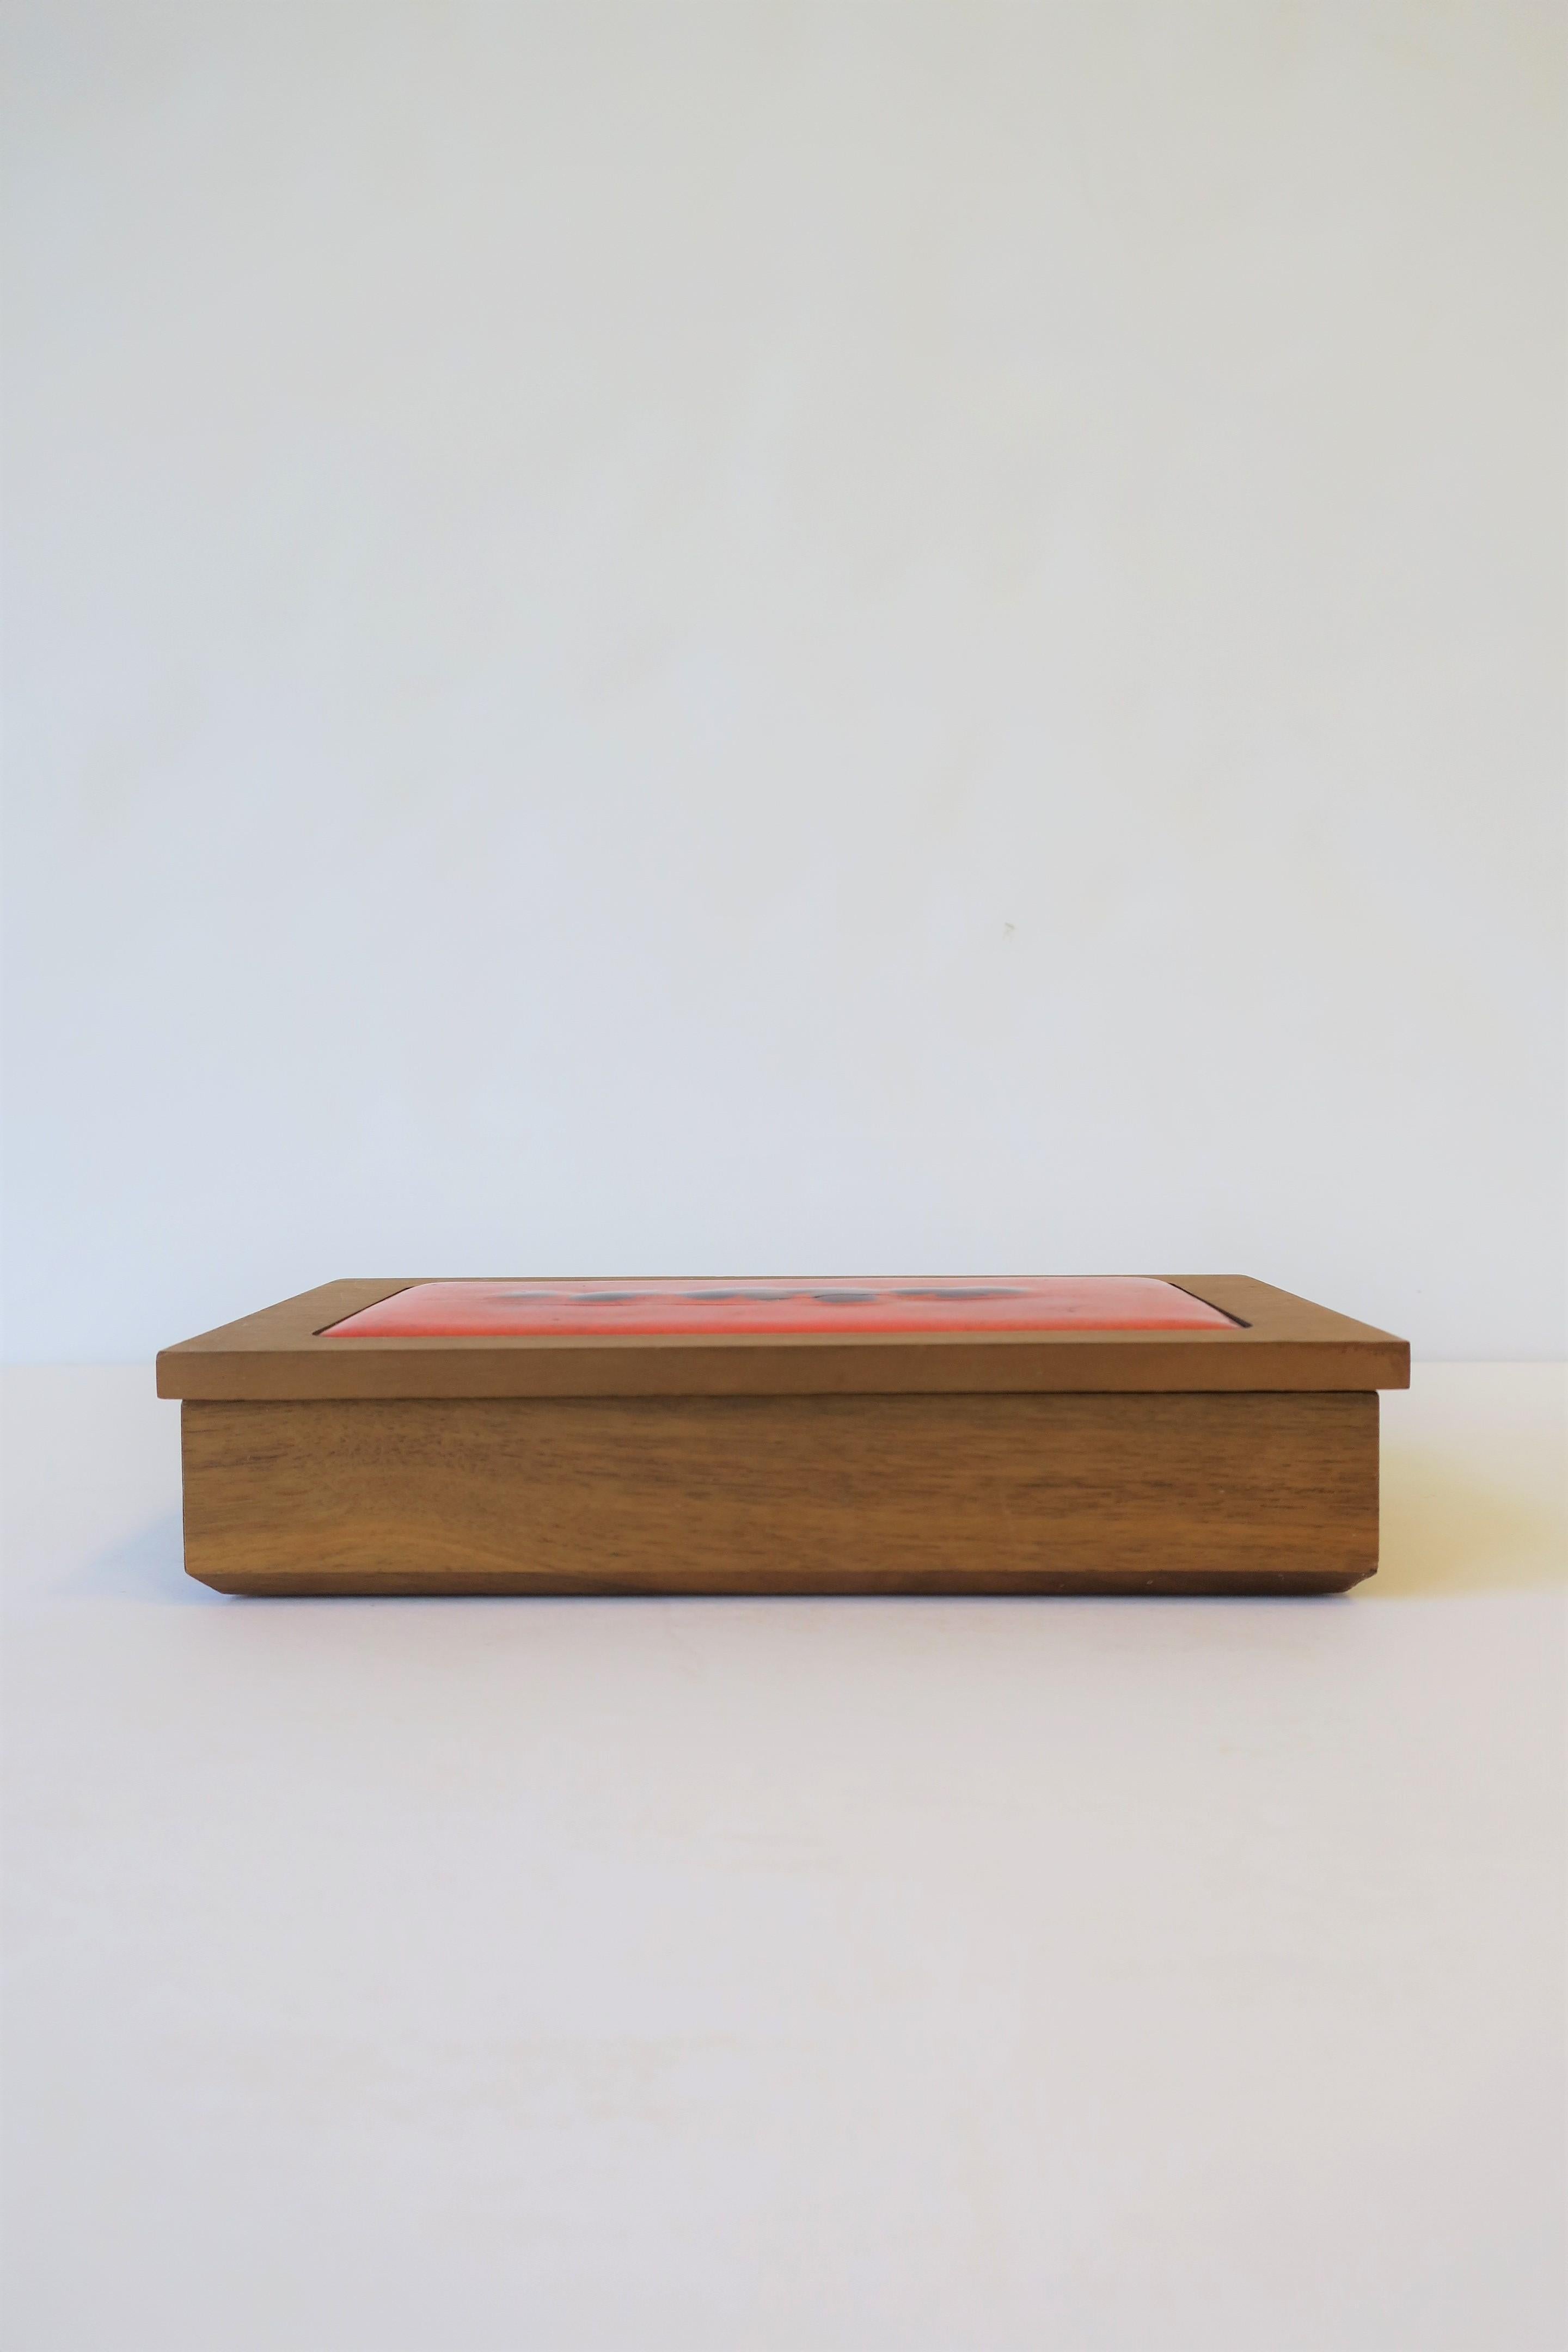 A beautiful Mid-Century Modern rectangular wood box with orange enamel or orange pottery and art glass decorative lid/top, circa mid-20th century, 1960s. Box could work well for small pieces like jewelry, trinkets, on a desk, or as a standalone